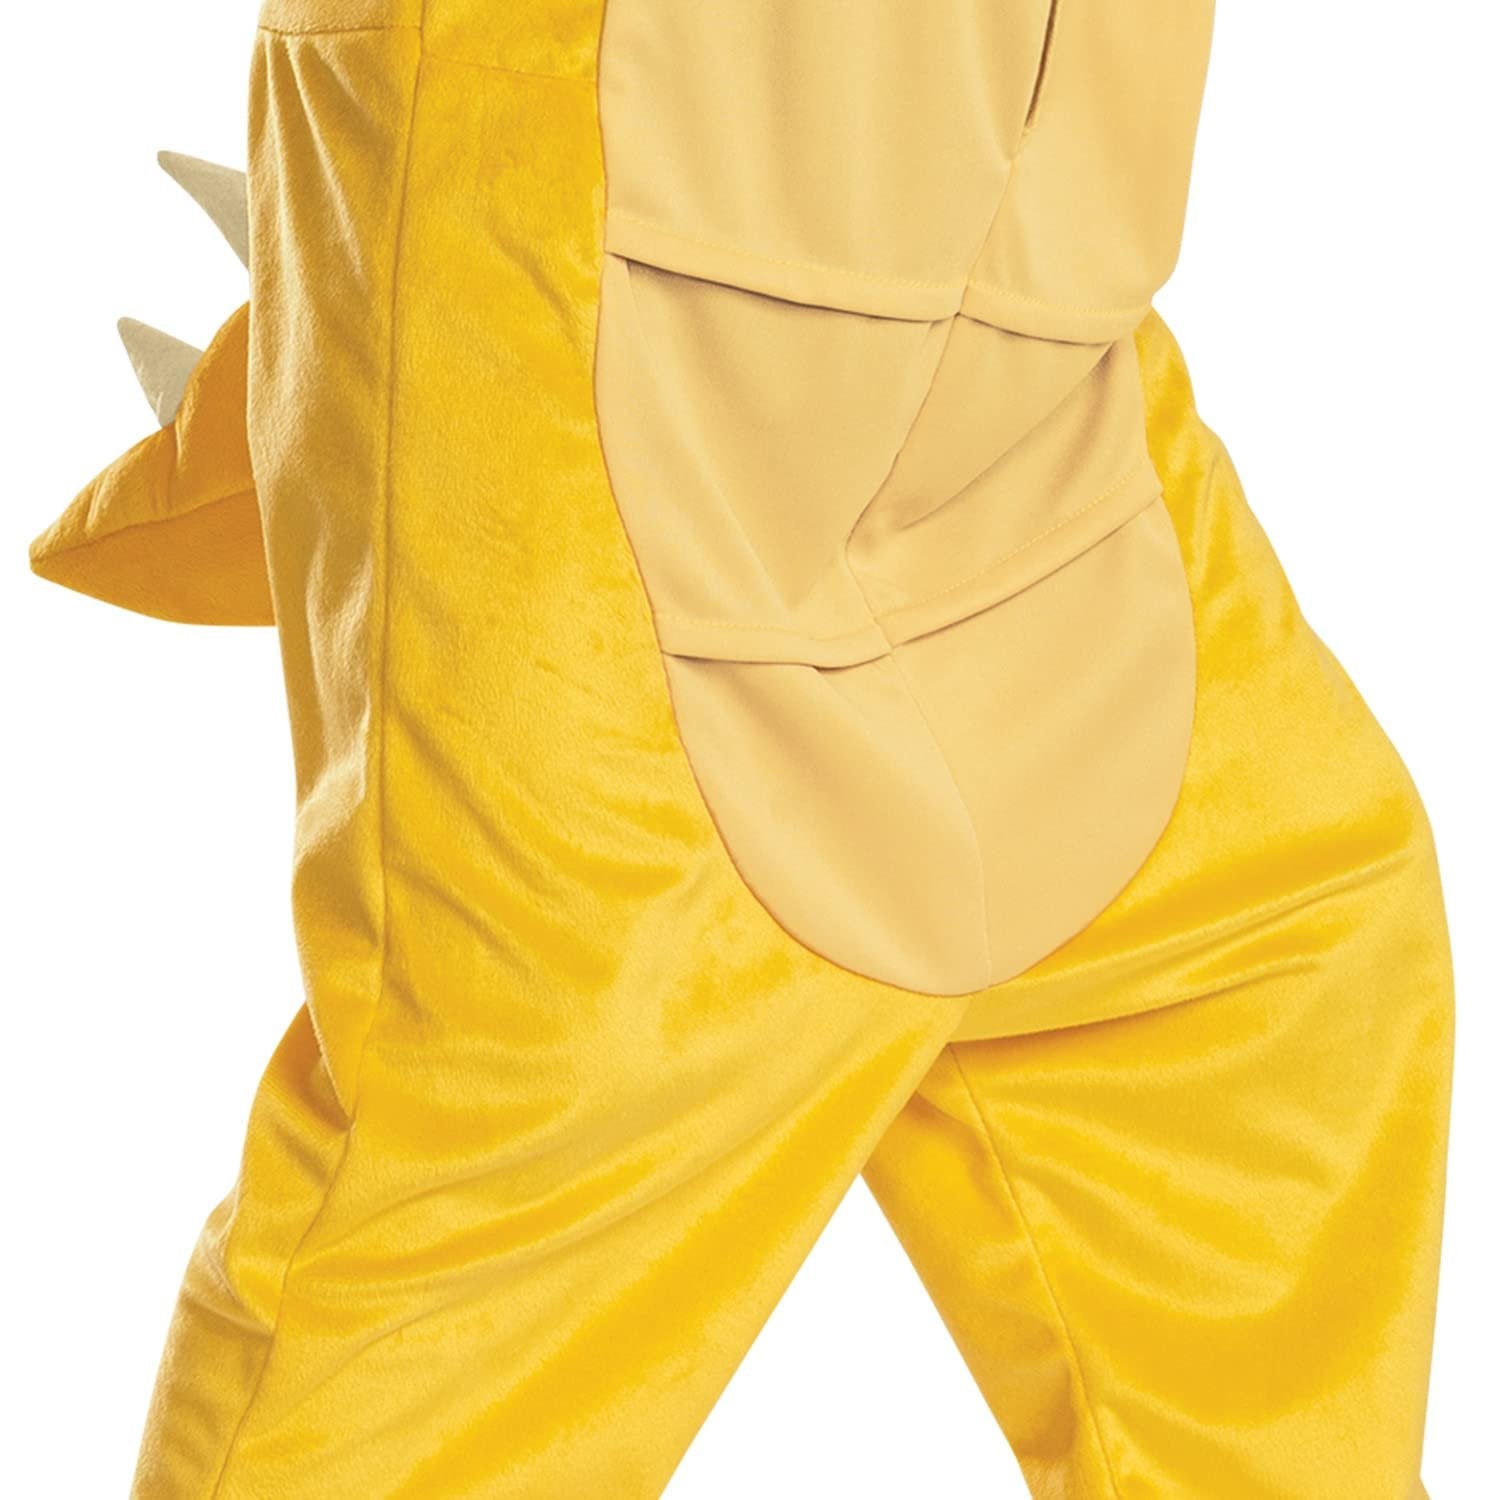 Bowser Costume Hooded Jumpsuit, Official Super Mario Character Costume for Kids, Size (14-16)